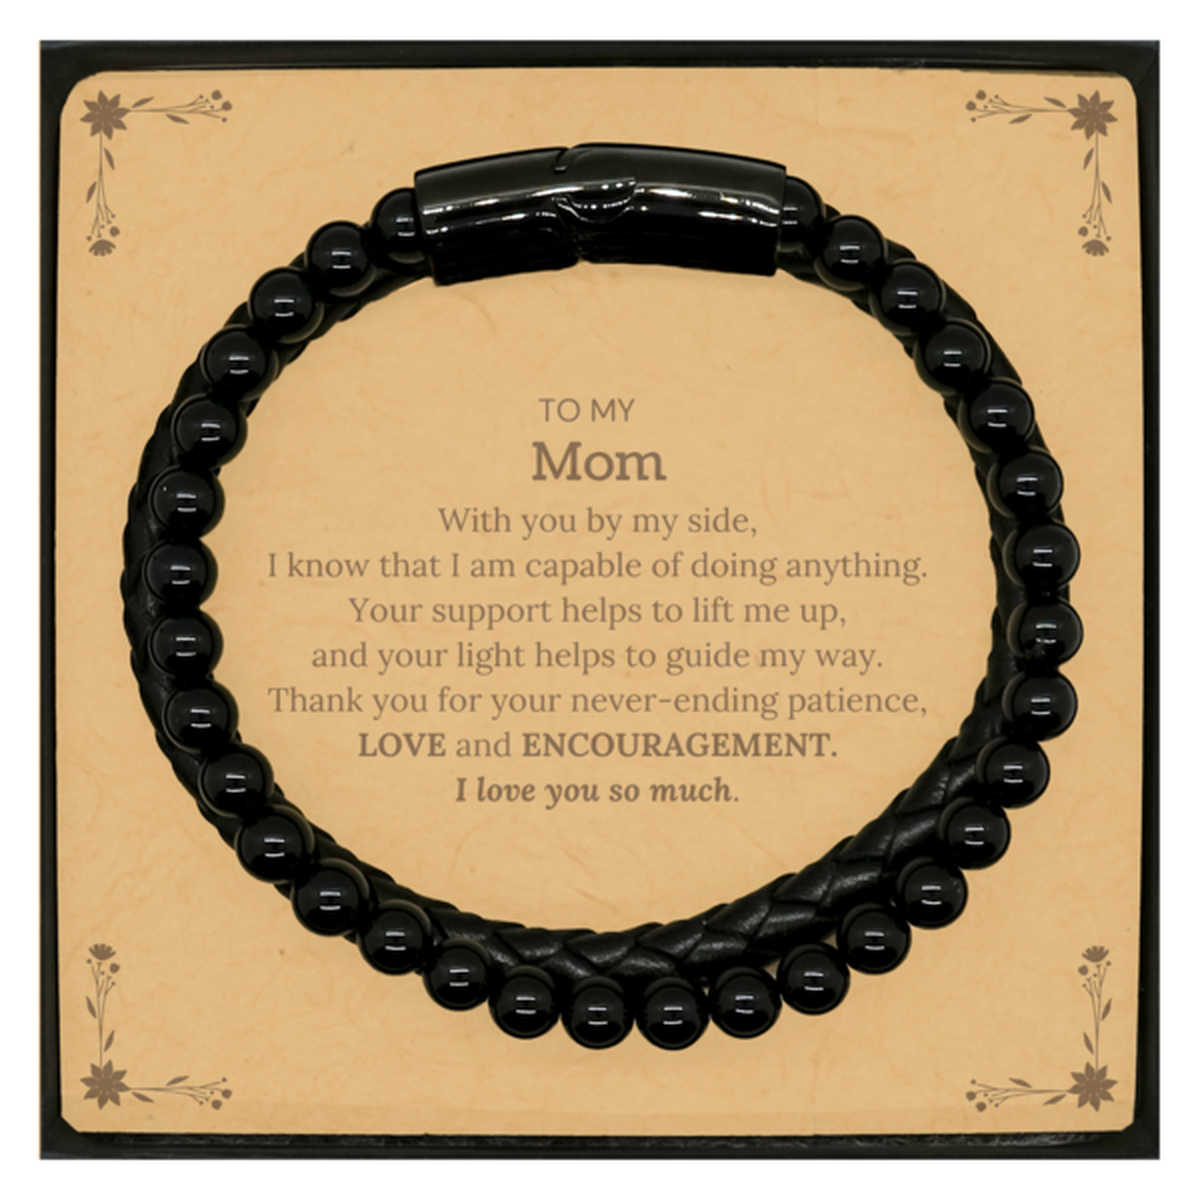 Appreciation Mom Stone Leather Bracelets Gifts, To My Mom Birthday Christmas Wedding Keepsake Gifts for Mom With you by my side, I know that I am capable of doing anything. I love you so much